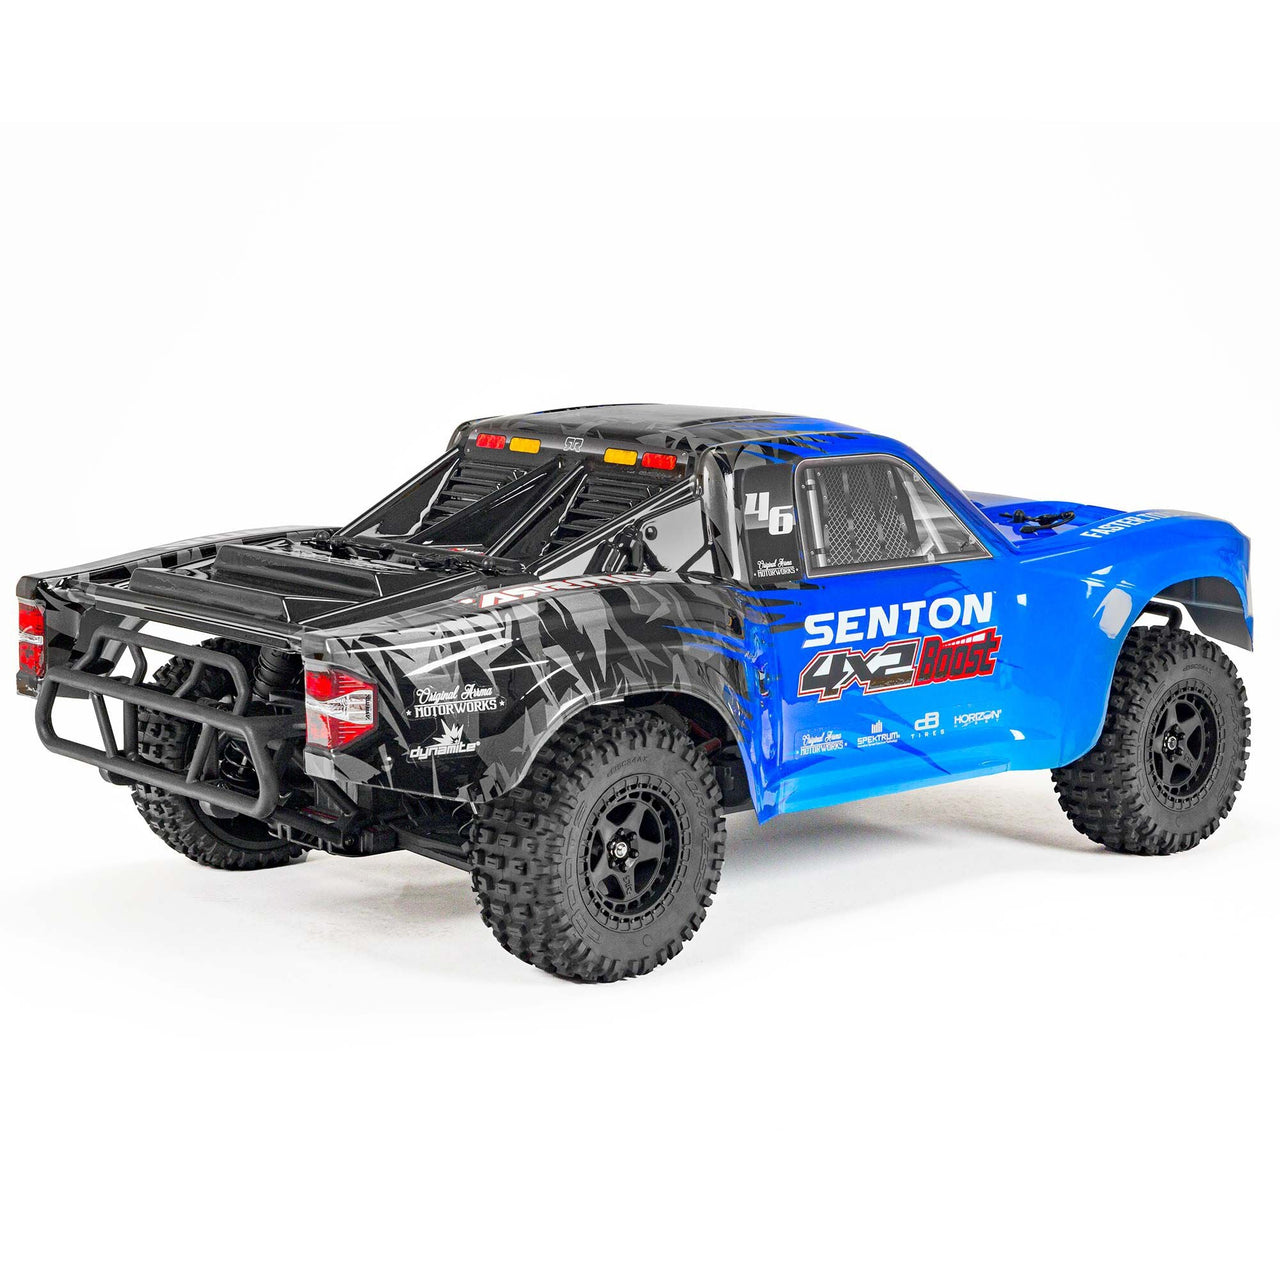 ARA4103SV4T2 1/10 SENTON 4X2 BOOST MEGA 550 Brushed Short Course Truck RTR, Blue with Battery & Charger